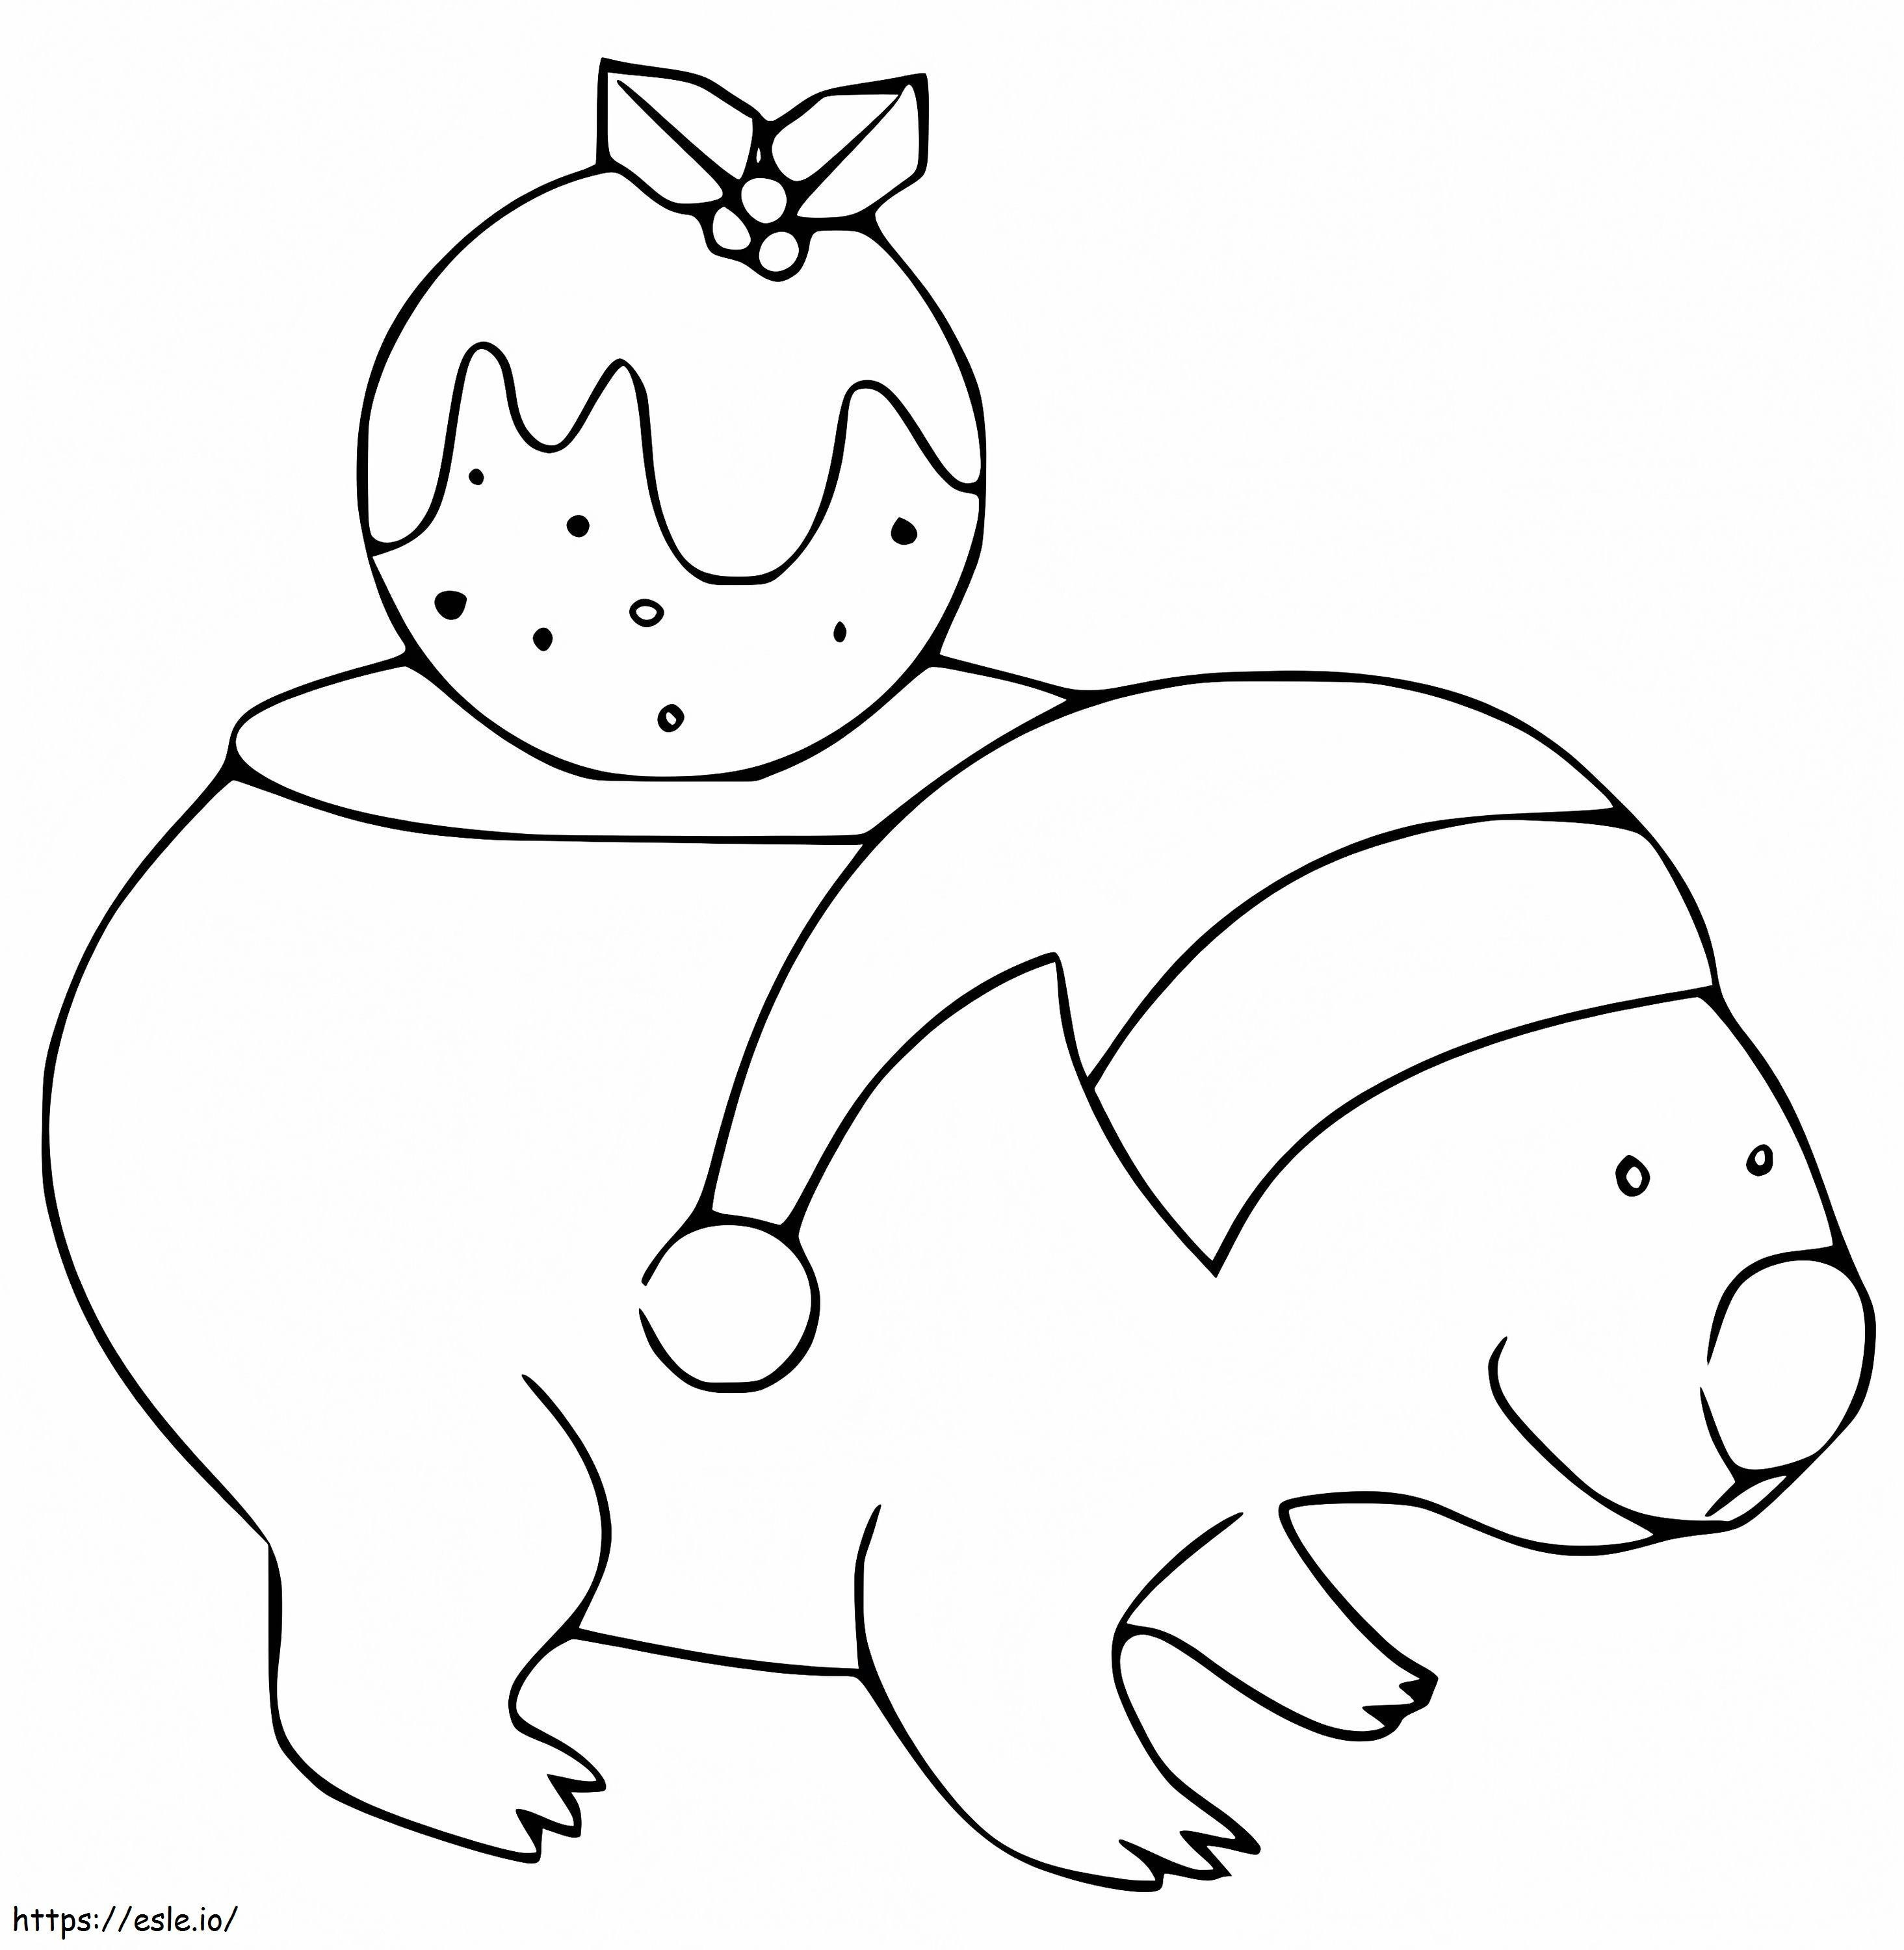 Christmas Wombat coloring page